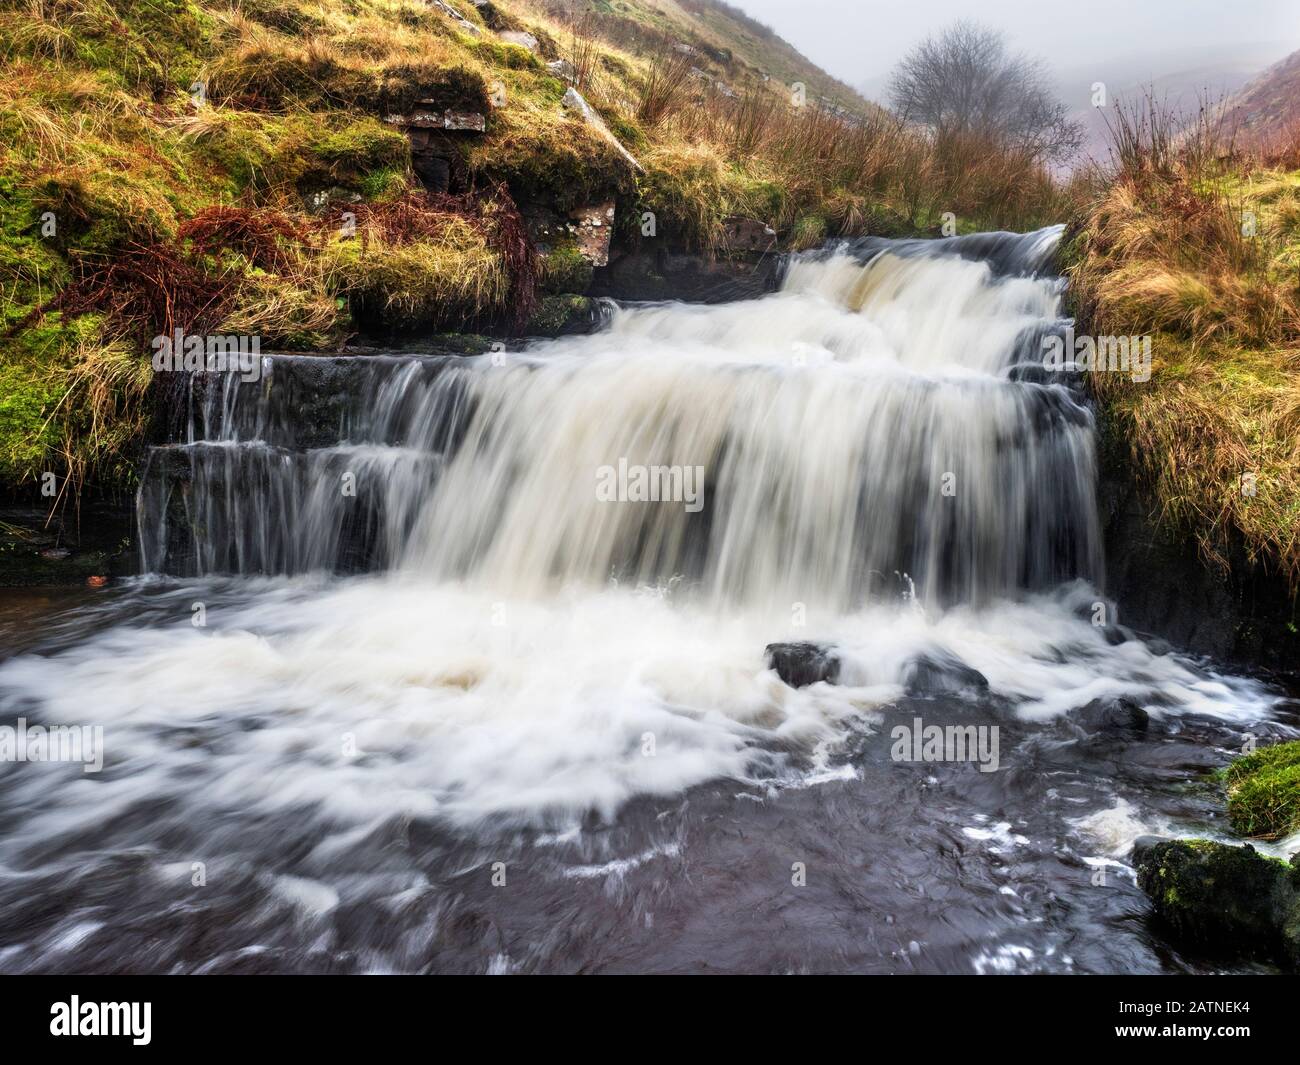 Waterfall in Force Gill near Ribblehead Yorkshire Dales National Park England Stock Photo